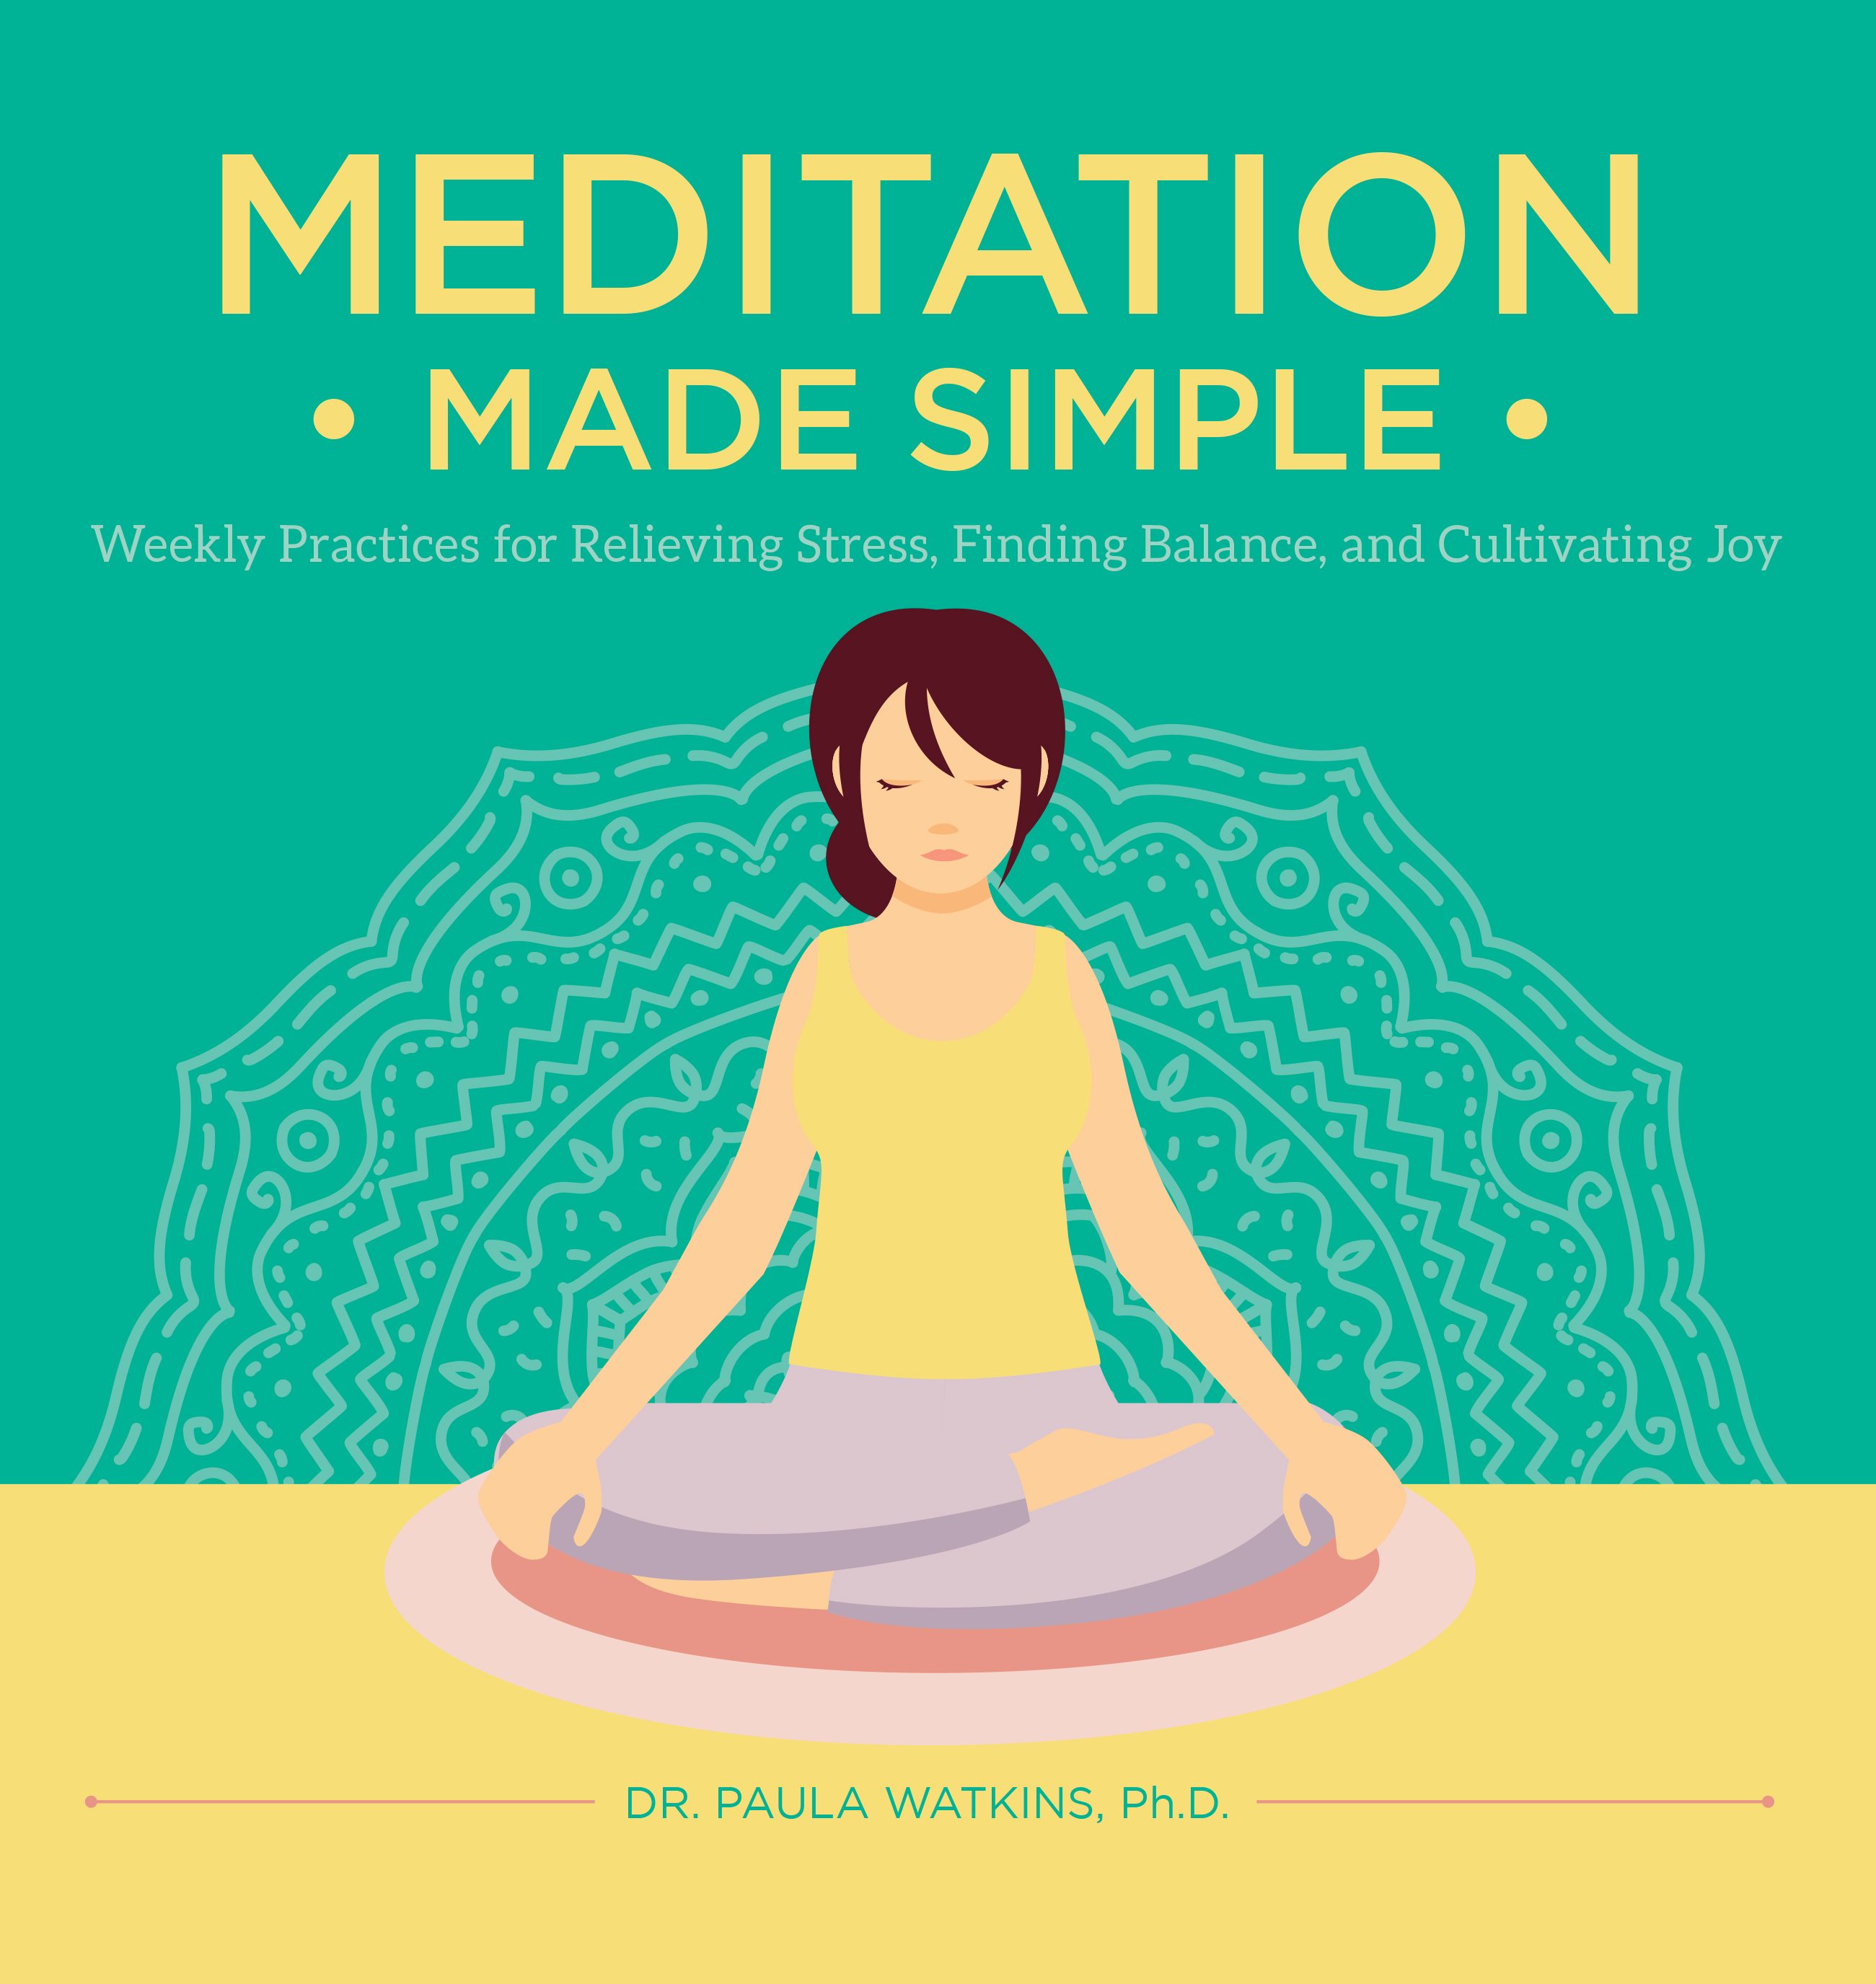 best of Good with meditation bonni guided